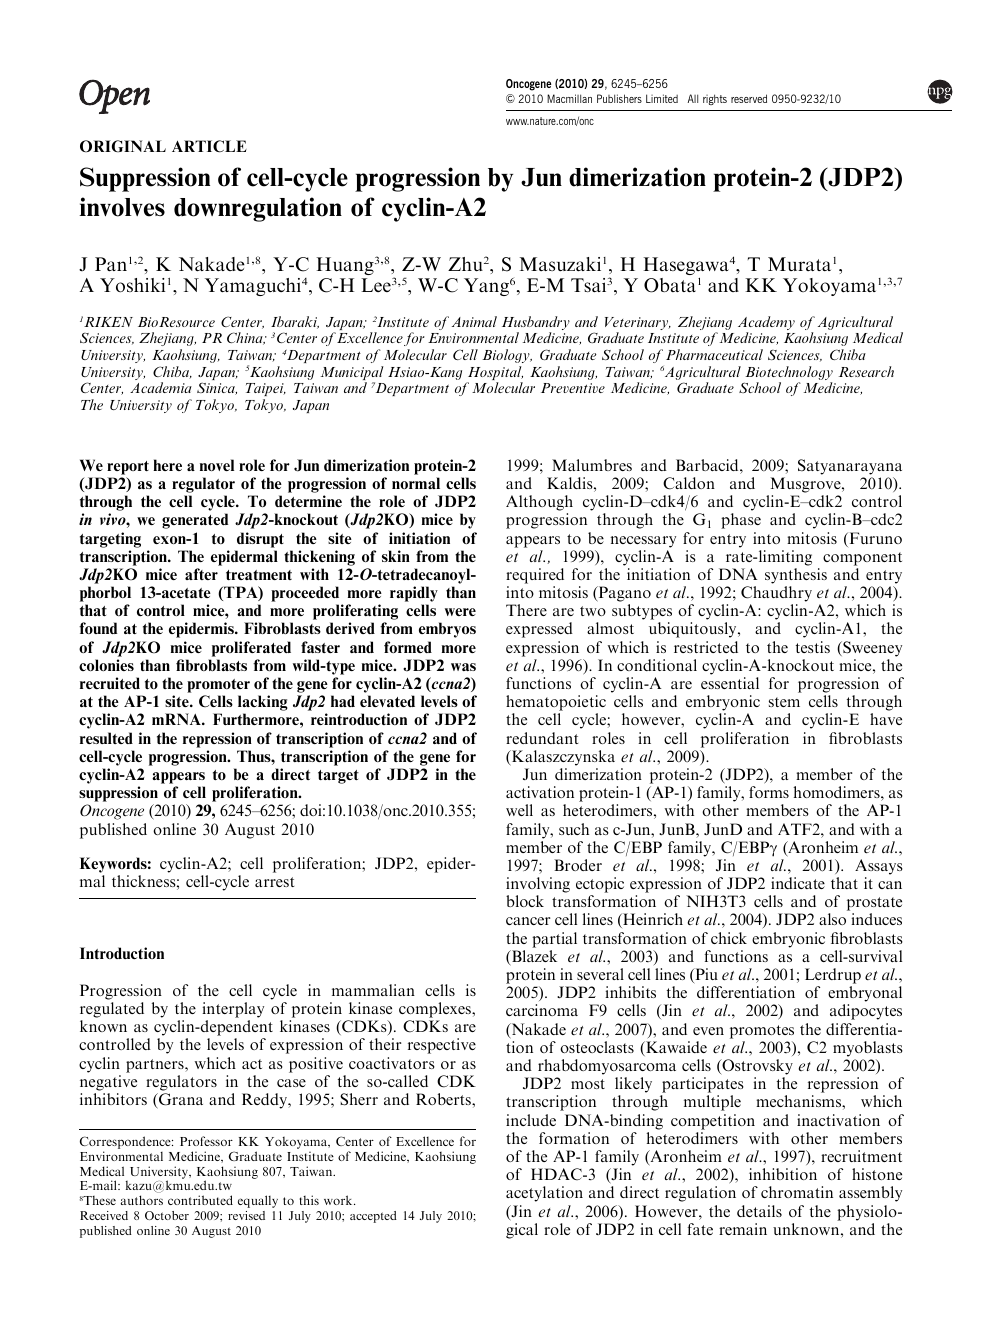 Suppression Of Cell Cycle Progression By Jun Dimerization Protein 2 Jdp2 Involves Downregulation Of Cyclin Topic Of Research Paper In Biological Sciences Download Scholarly Article Pdf And Read For Free On Cyberleninka Open